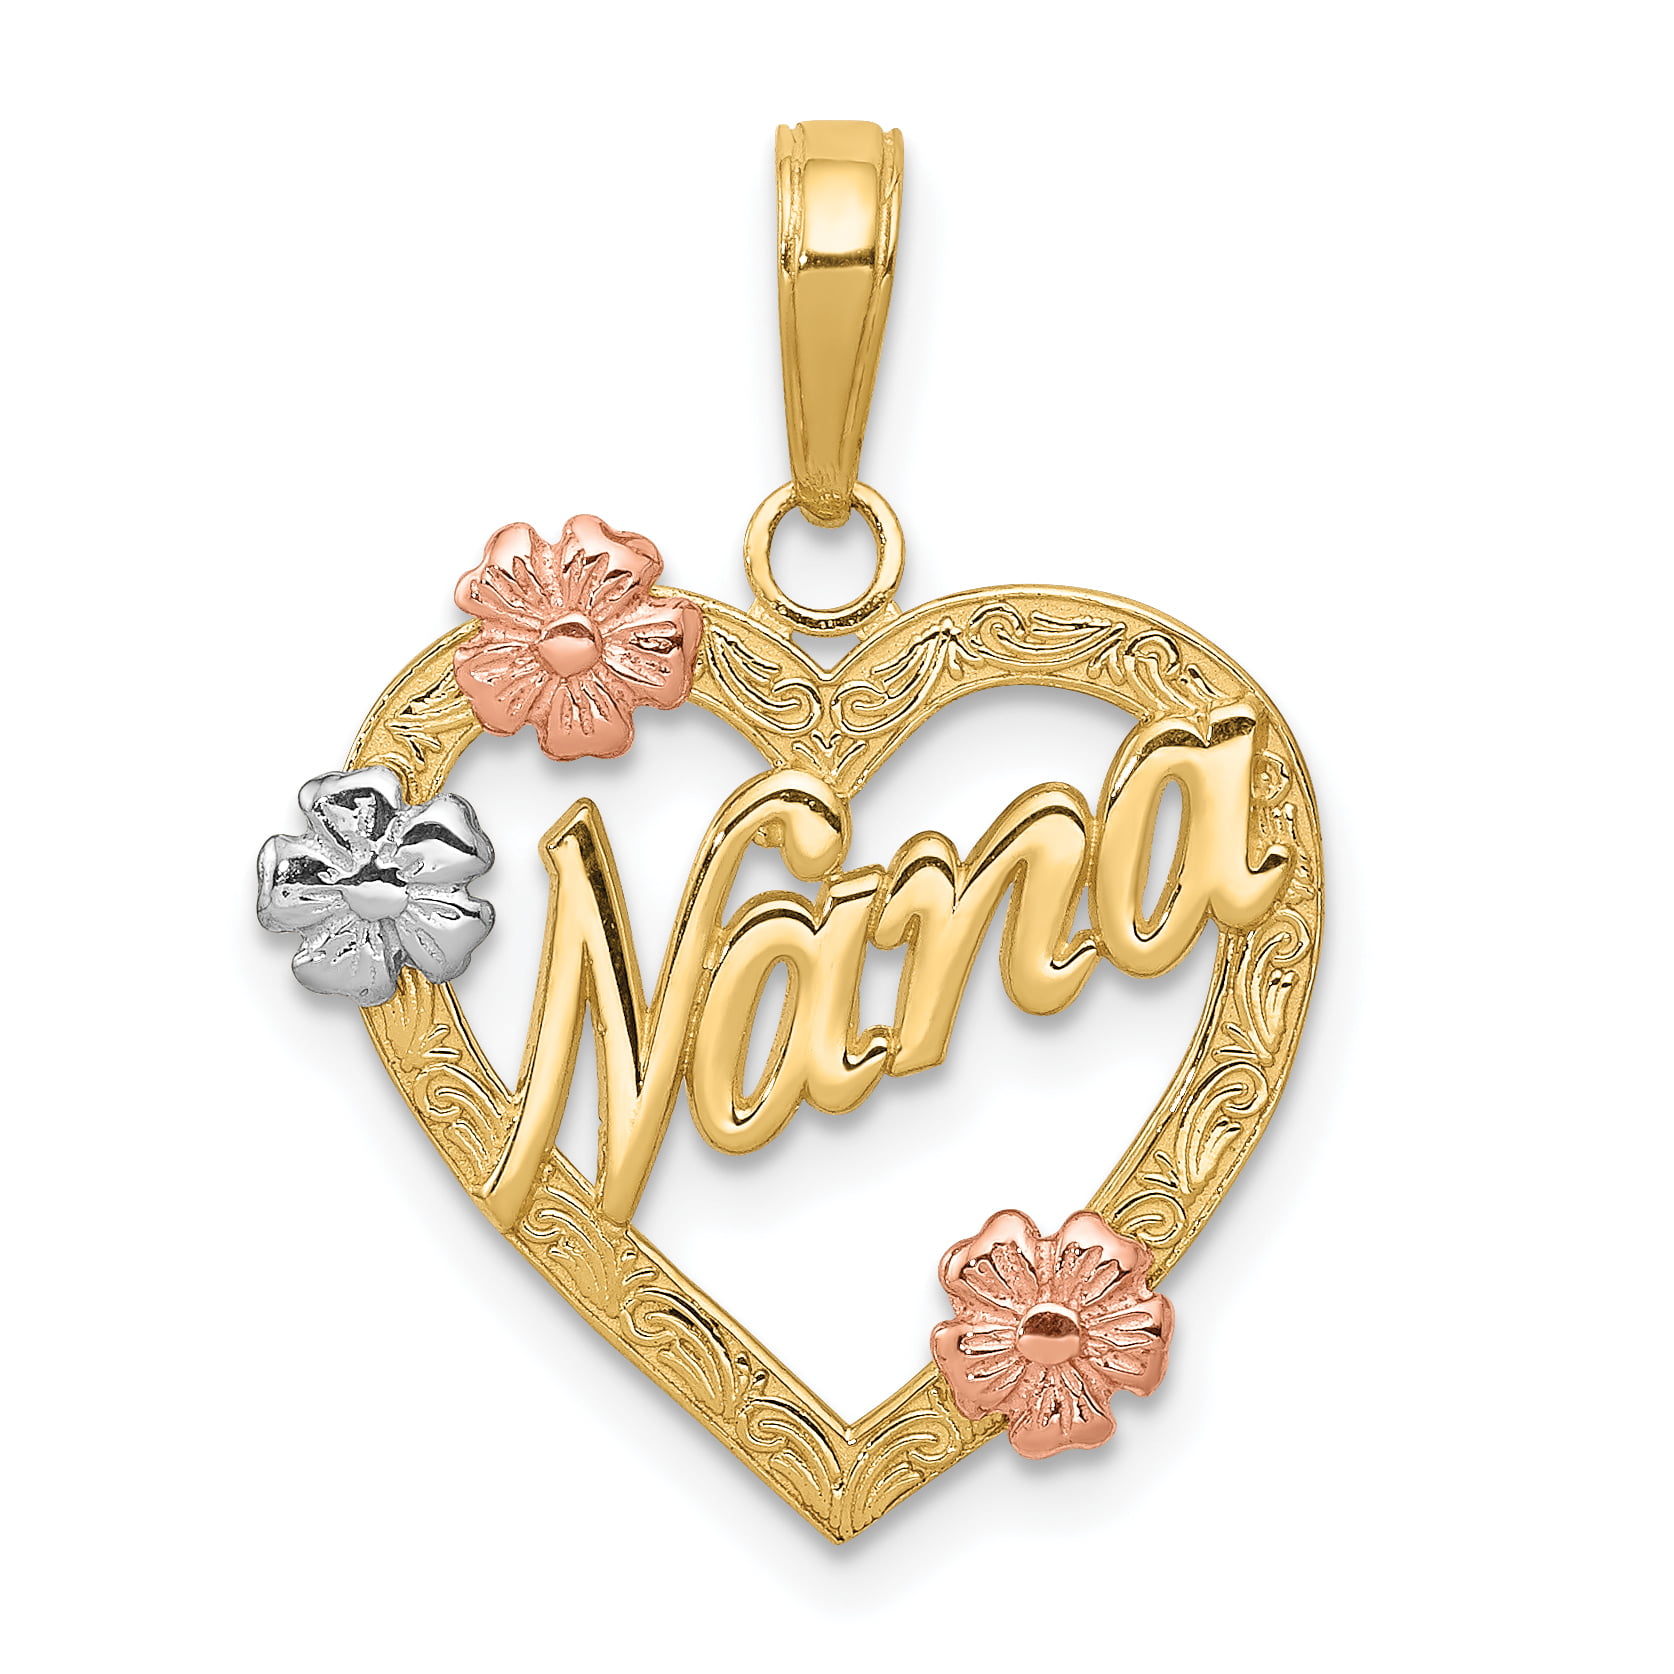 10k Yellow Gold Hockey Mom Pendant Charm Necklace Sport Fine Jewelry For Women Gifts For Her